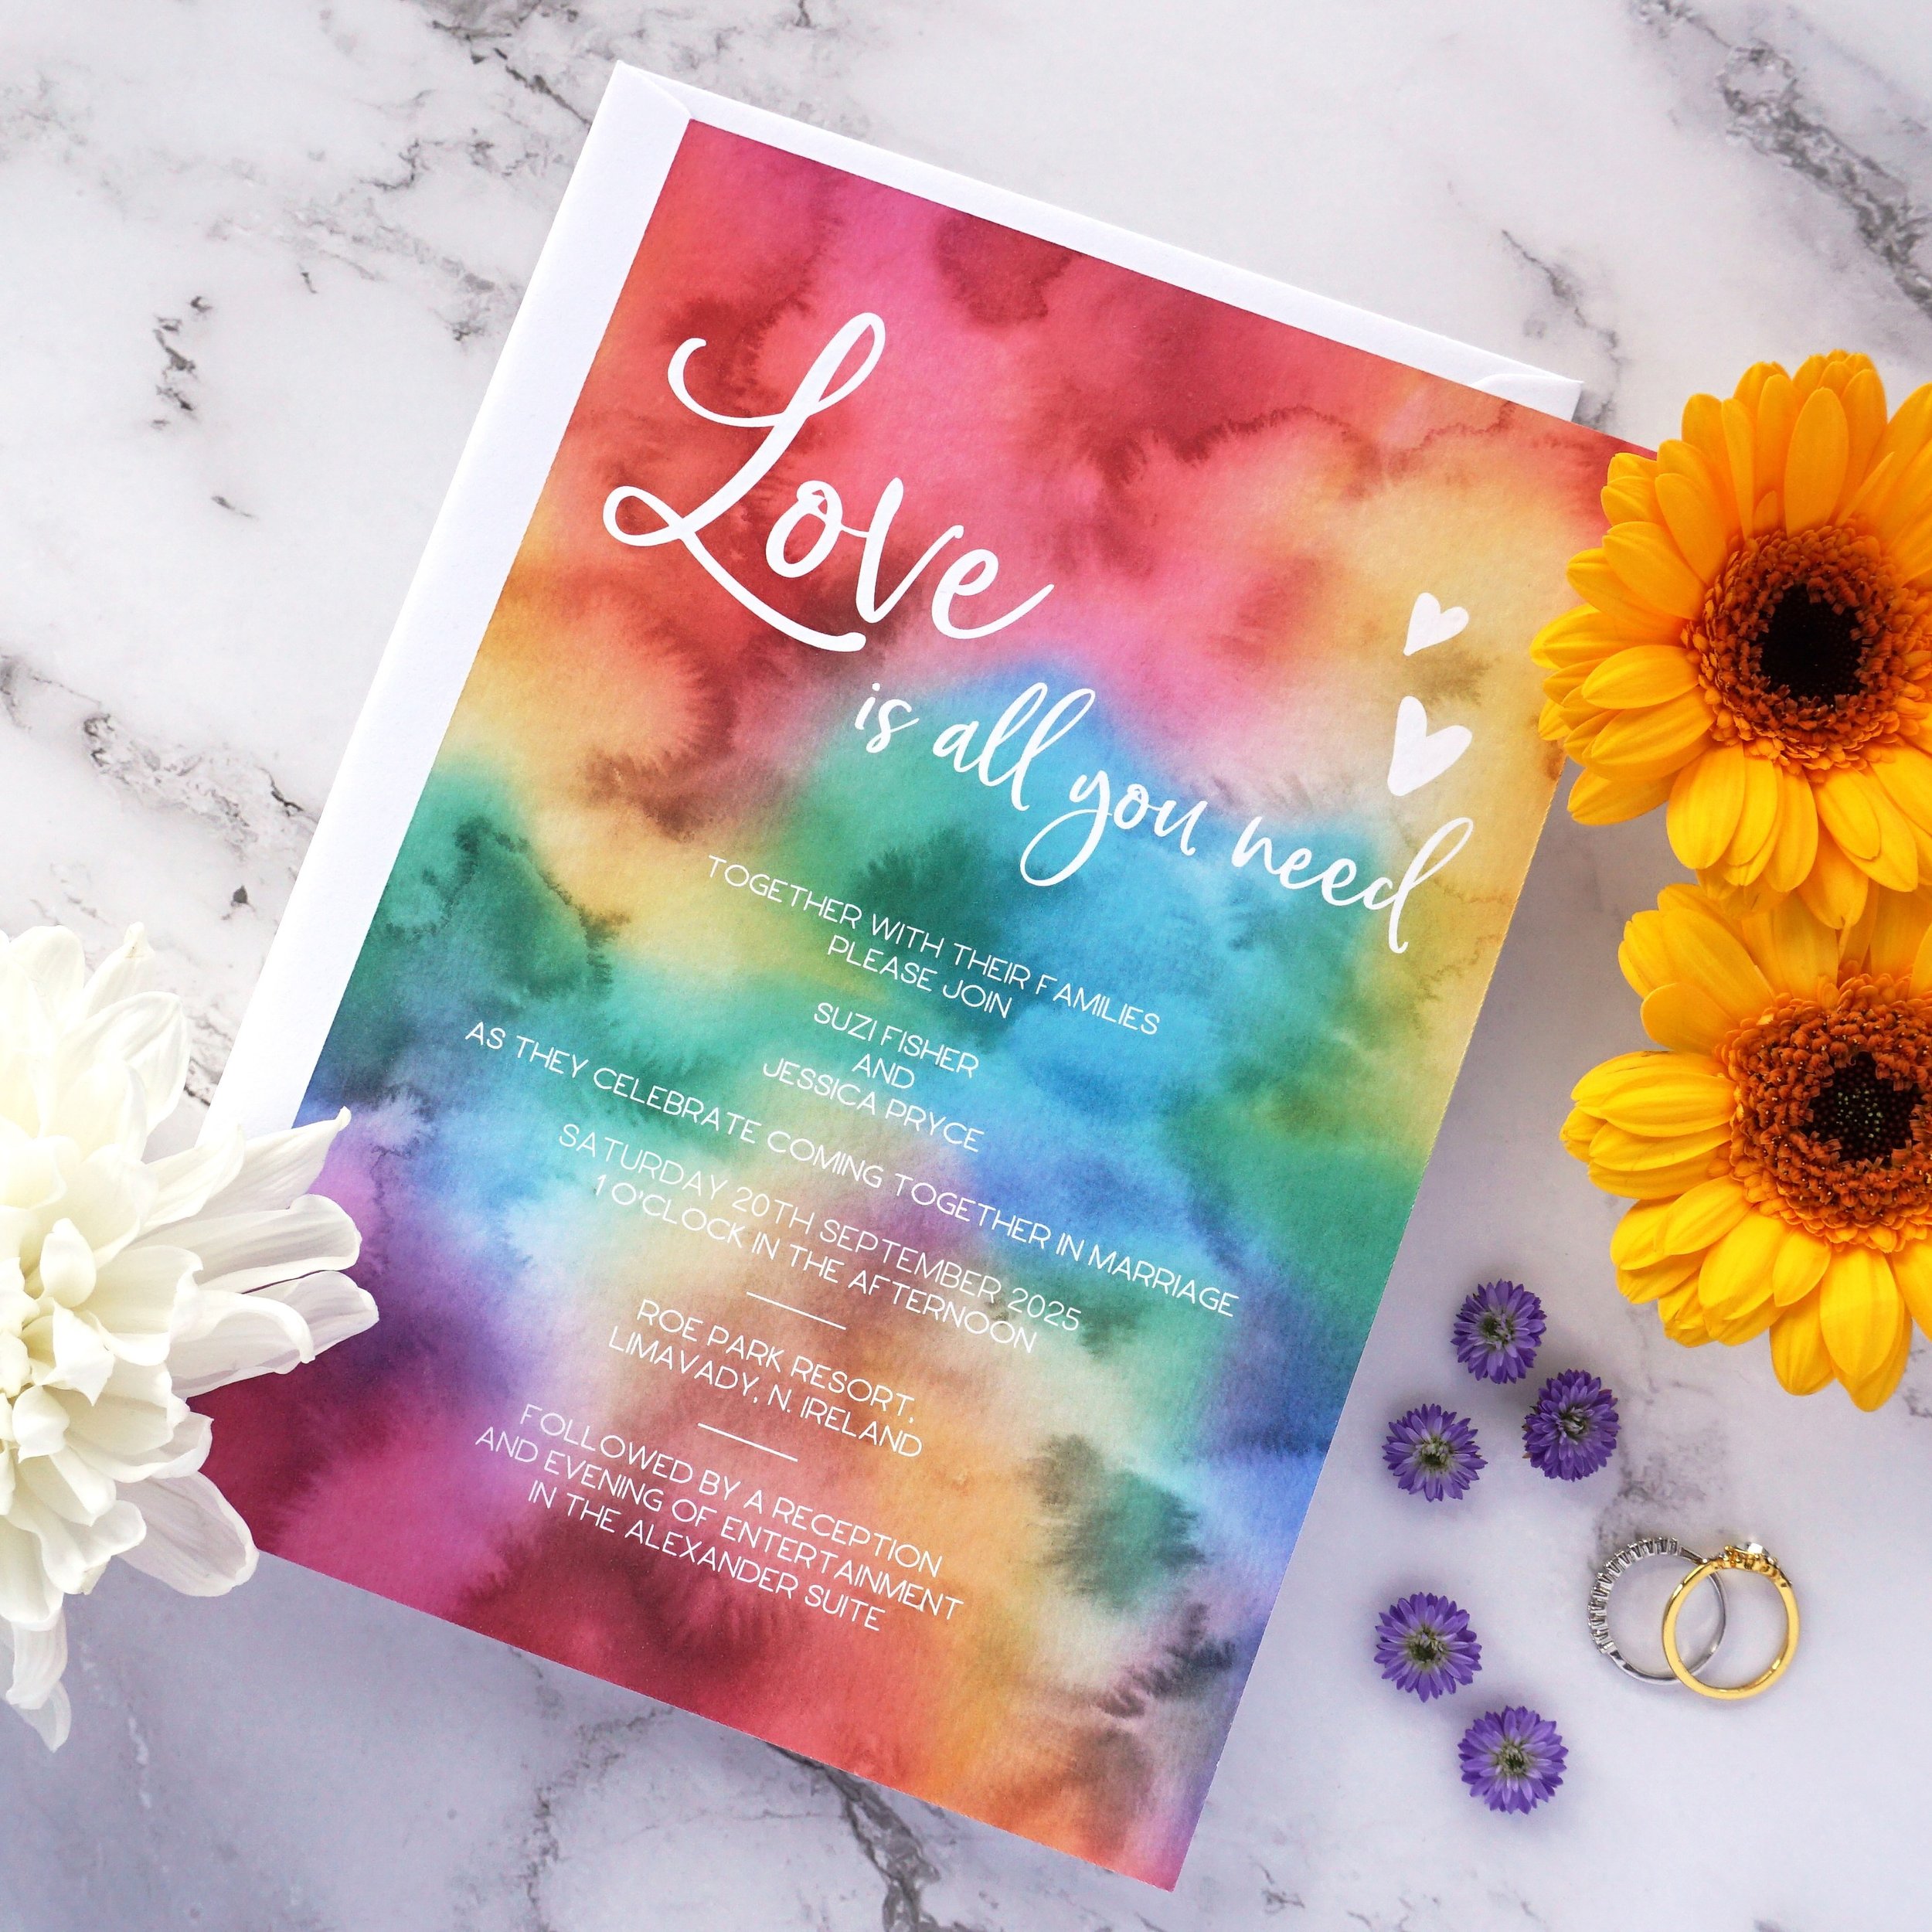 SUZI - Love is all you need and all you need is love! Fall head over heels in love with this beautiful rainbow watercolour suite, shown here with a luxury dove white envelope
.
.
.
#Weddingstationerysample #samplestationery #weddingstationery #gettin